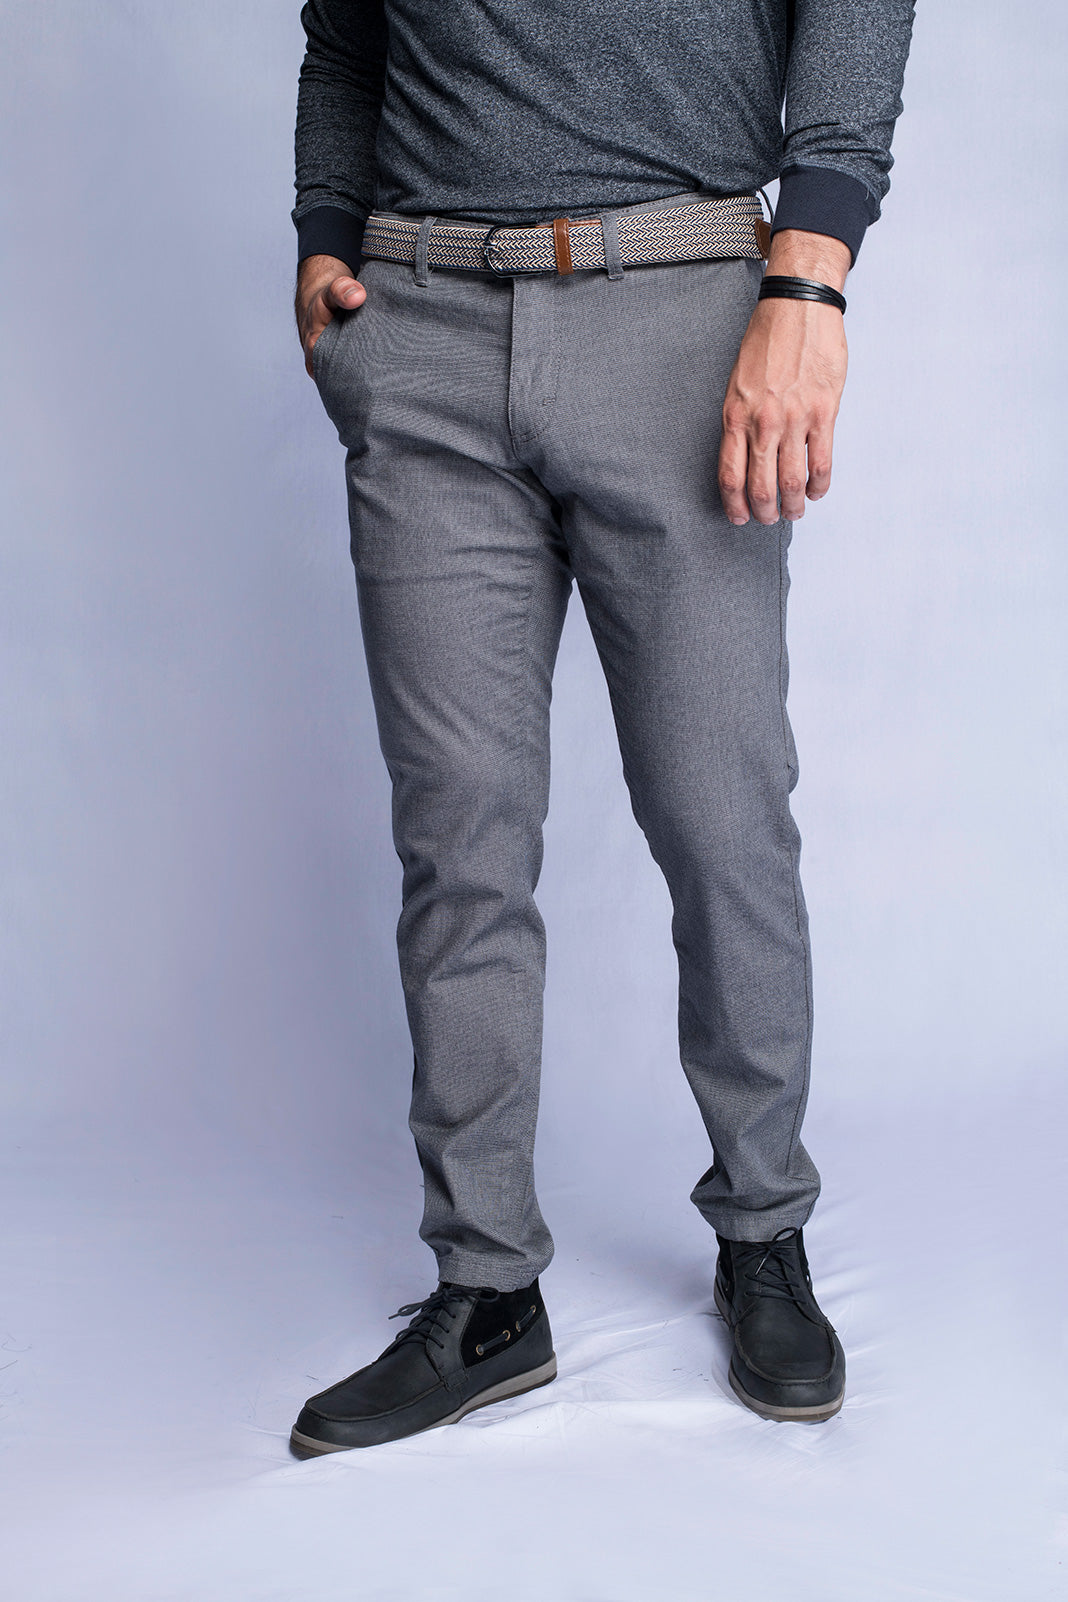 Andrew Smith Celana Panjang Chinos Slim Fit Pria A0027X04A